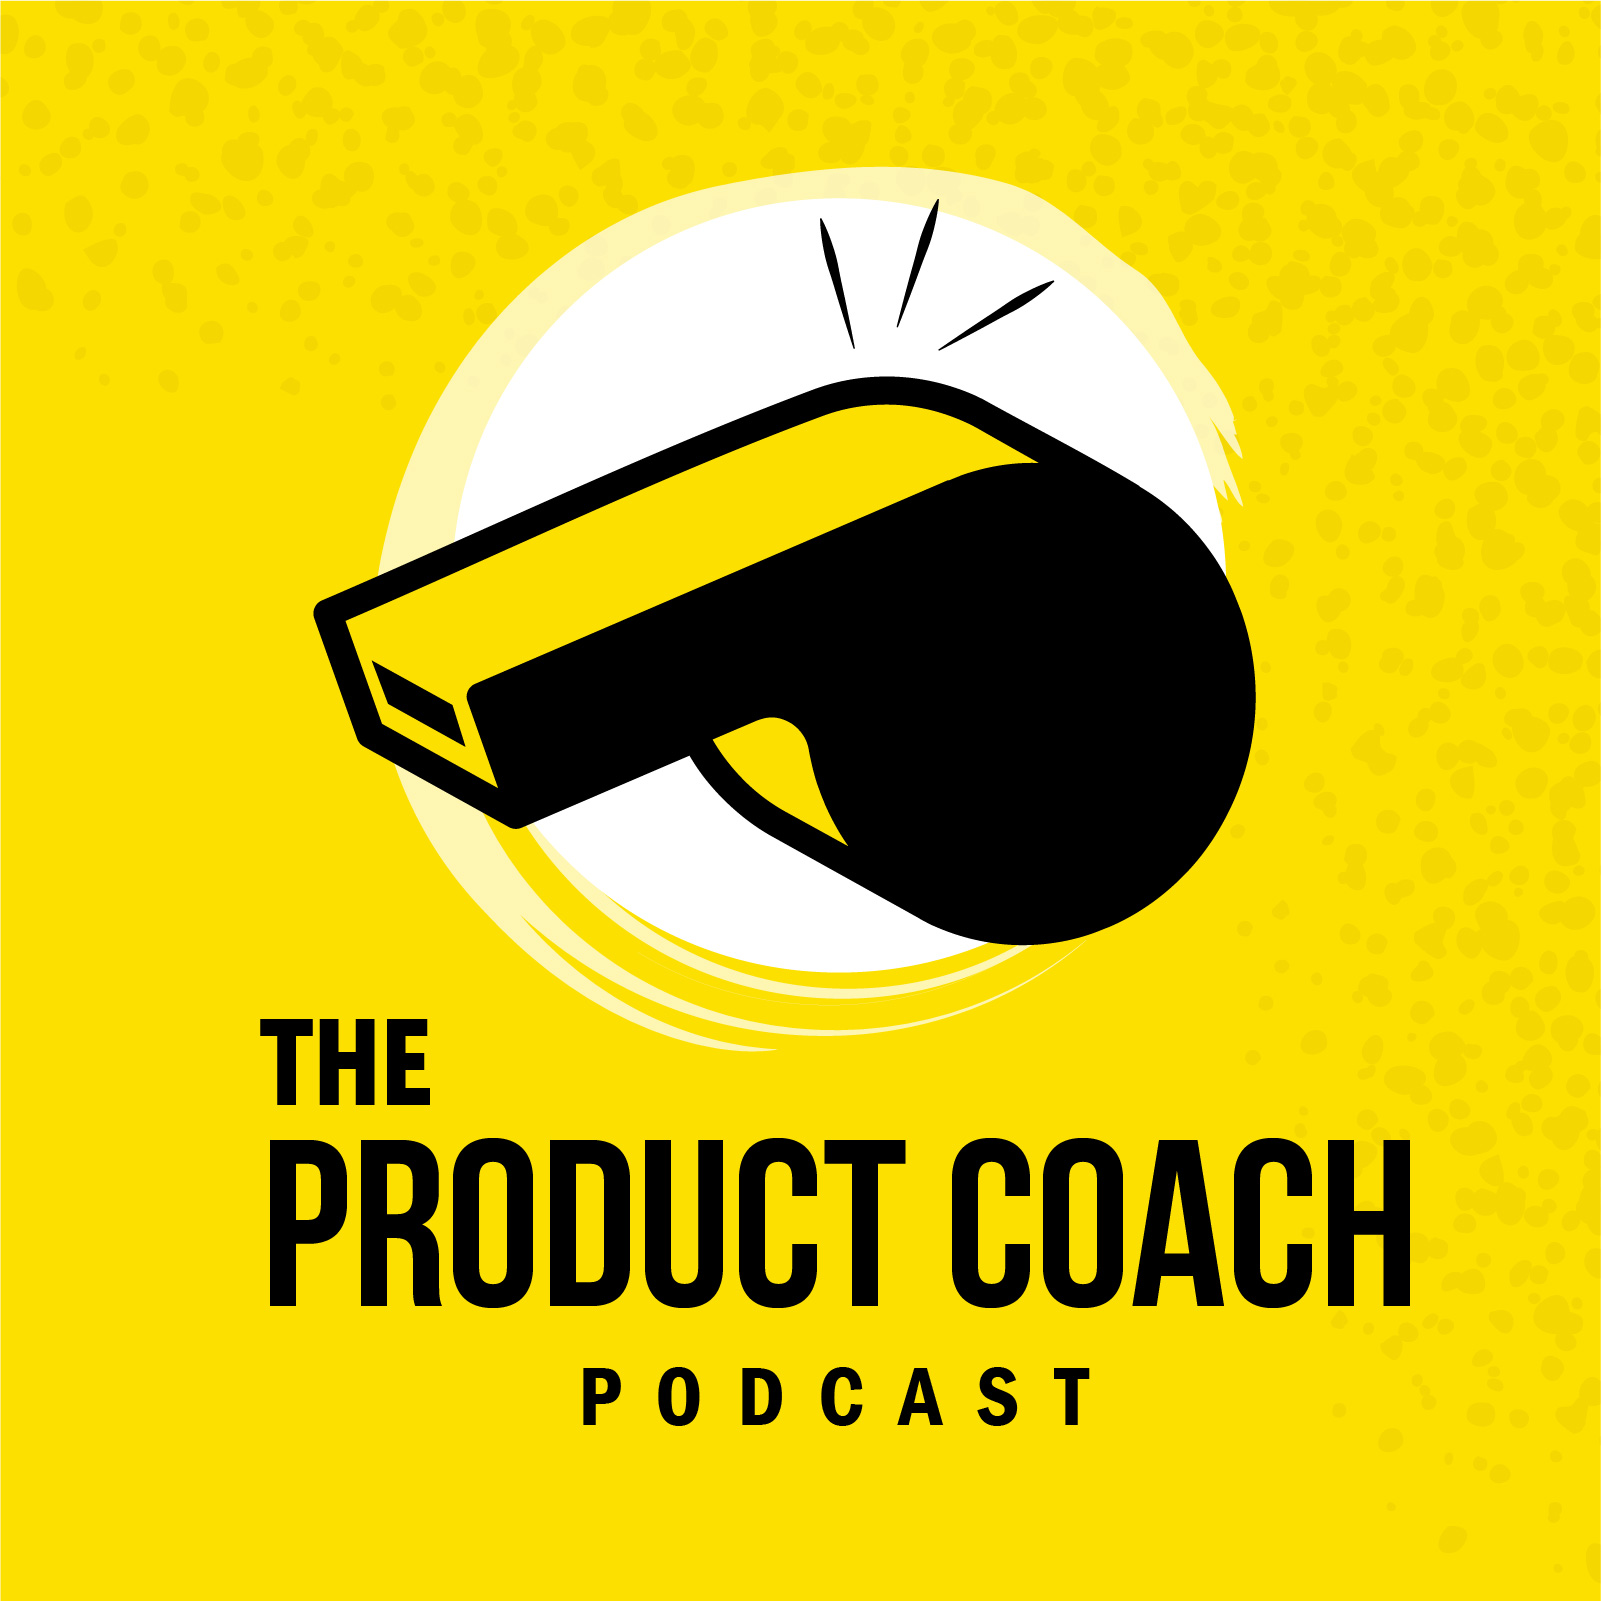 The Product Coach Podcast